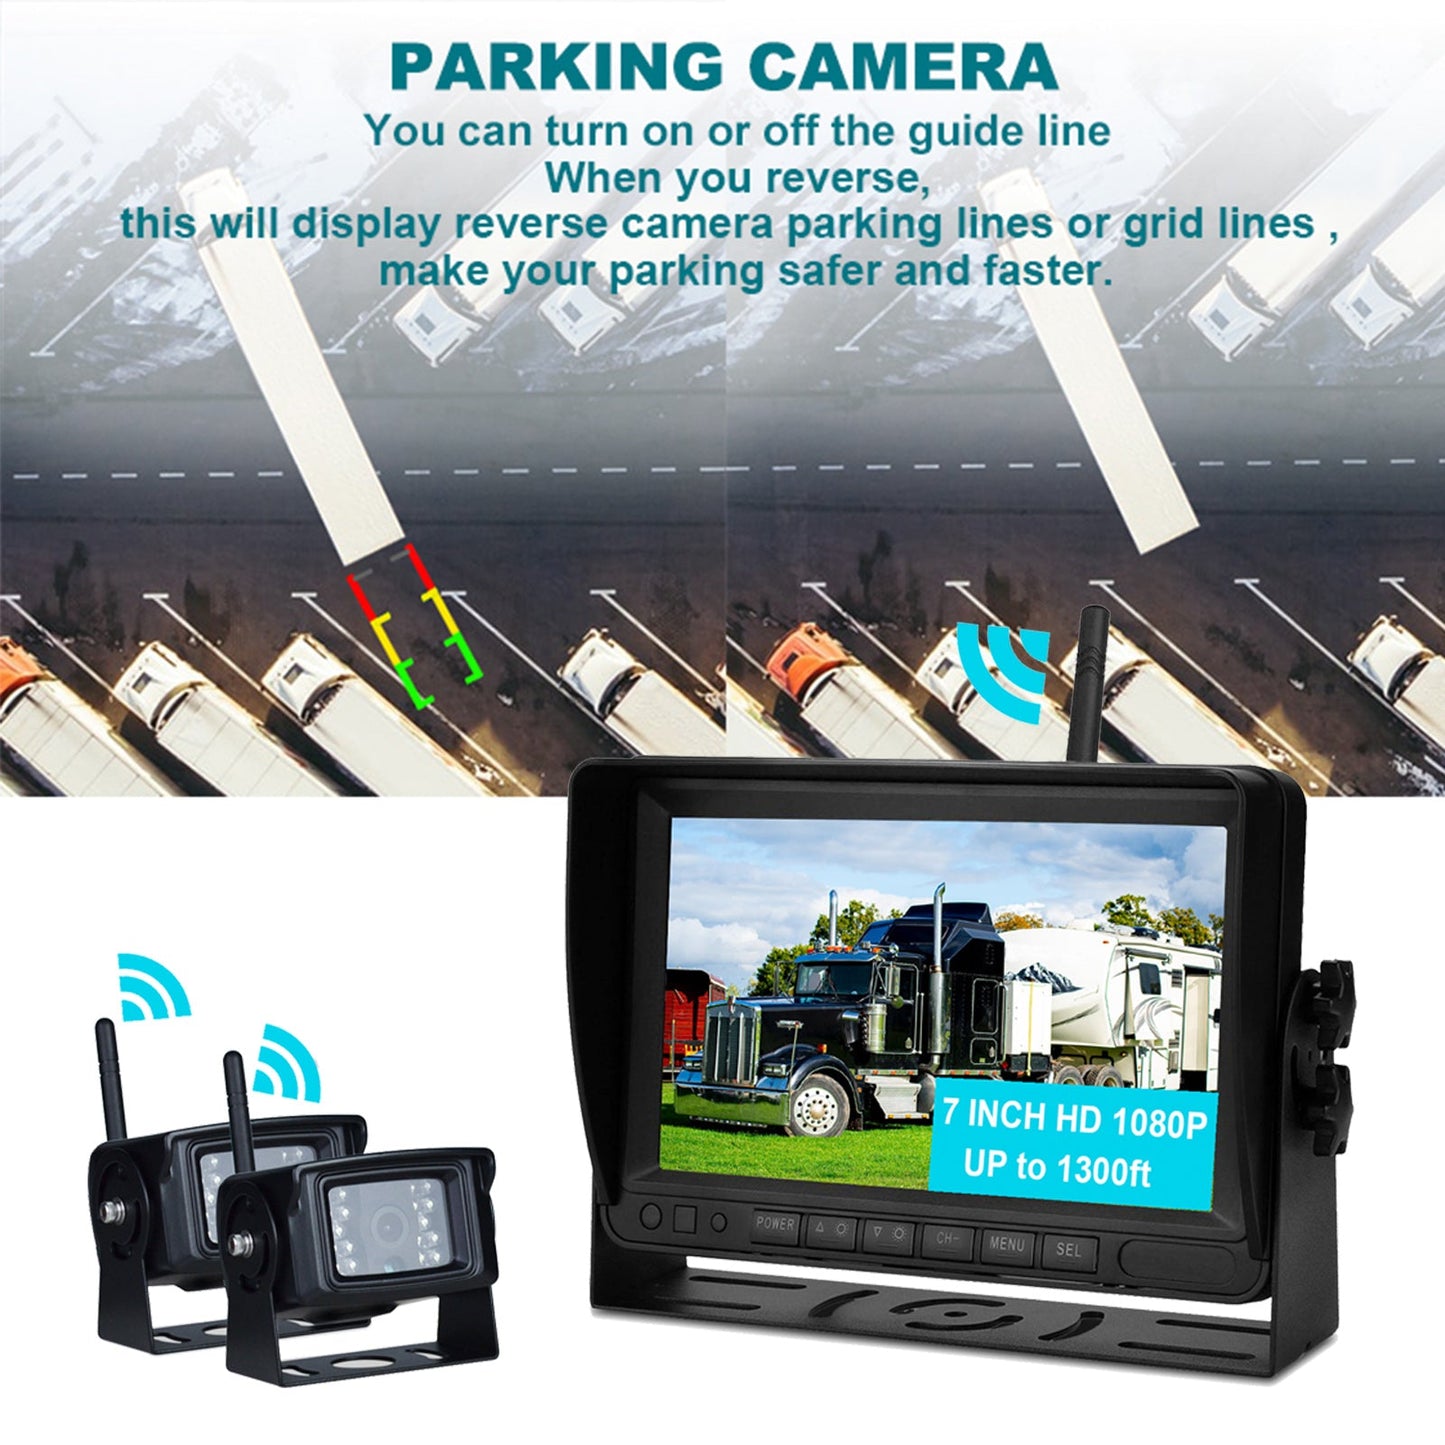 7" Display AHD 1080P Wireless 2CH Rear View Backup Camera Kit for Truck Trailer